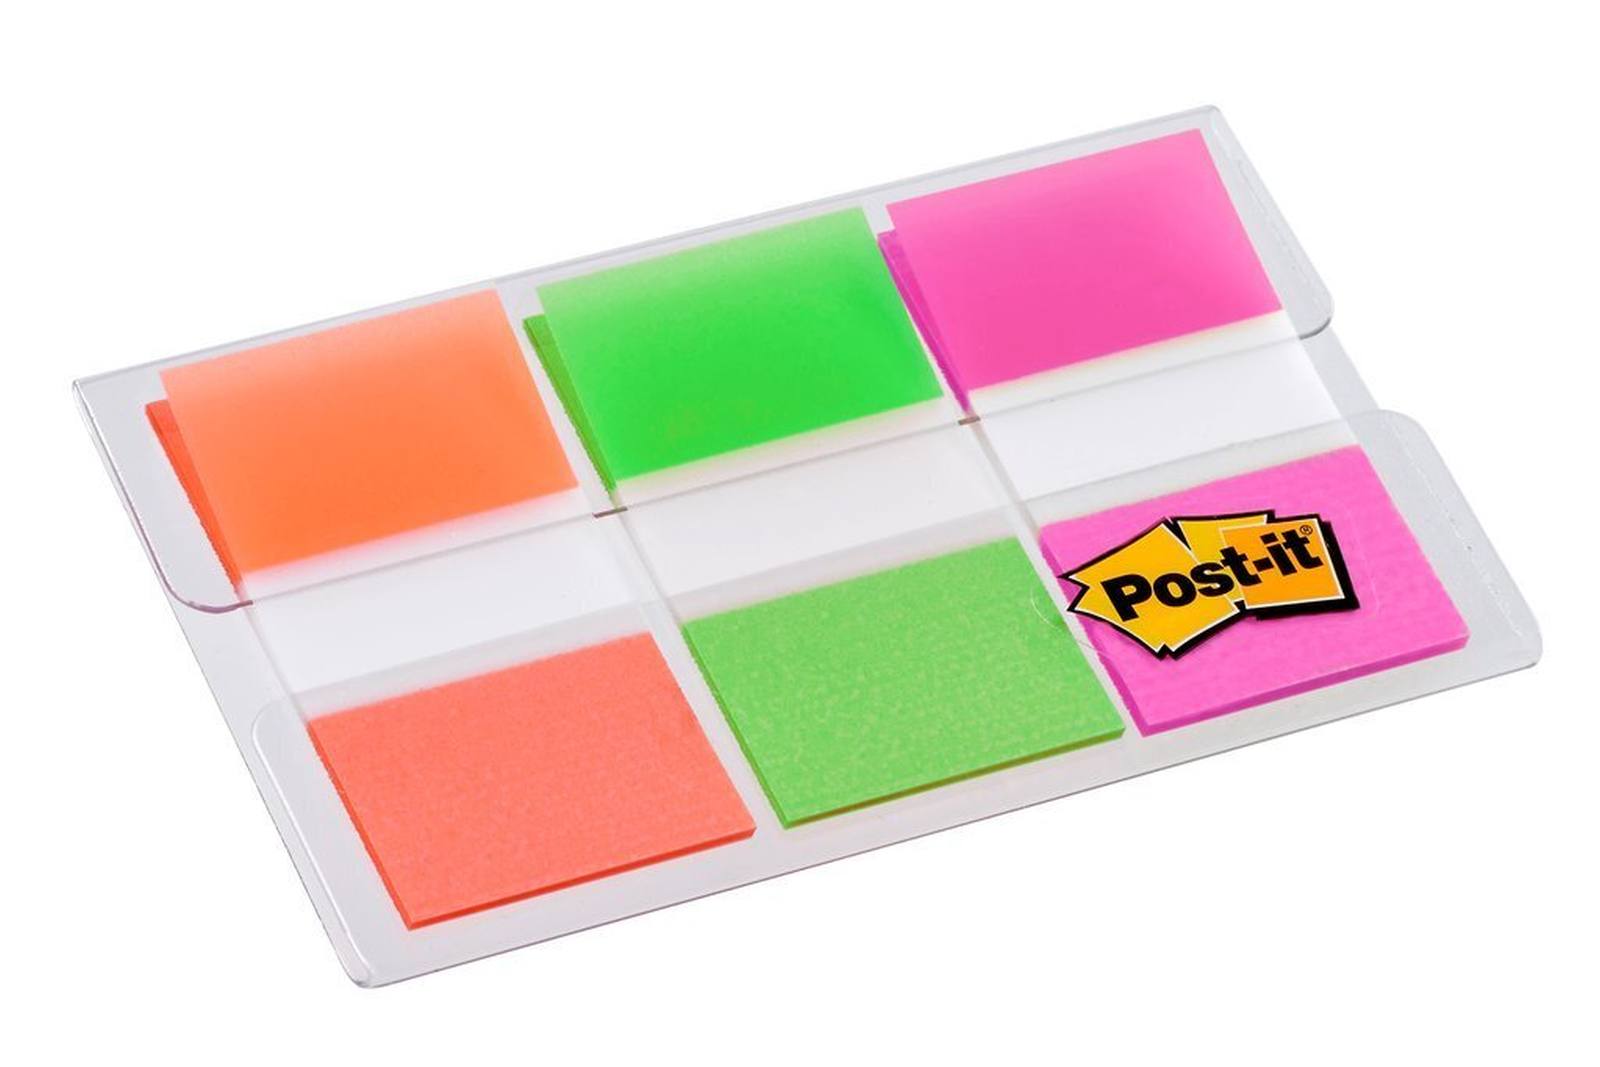 3M Post-it Index 680-OLP, 25.4 mm x 43.2 mm, orange, lime green, pink, 3 x 20 adhesive strips